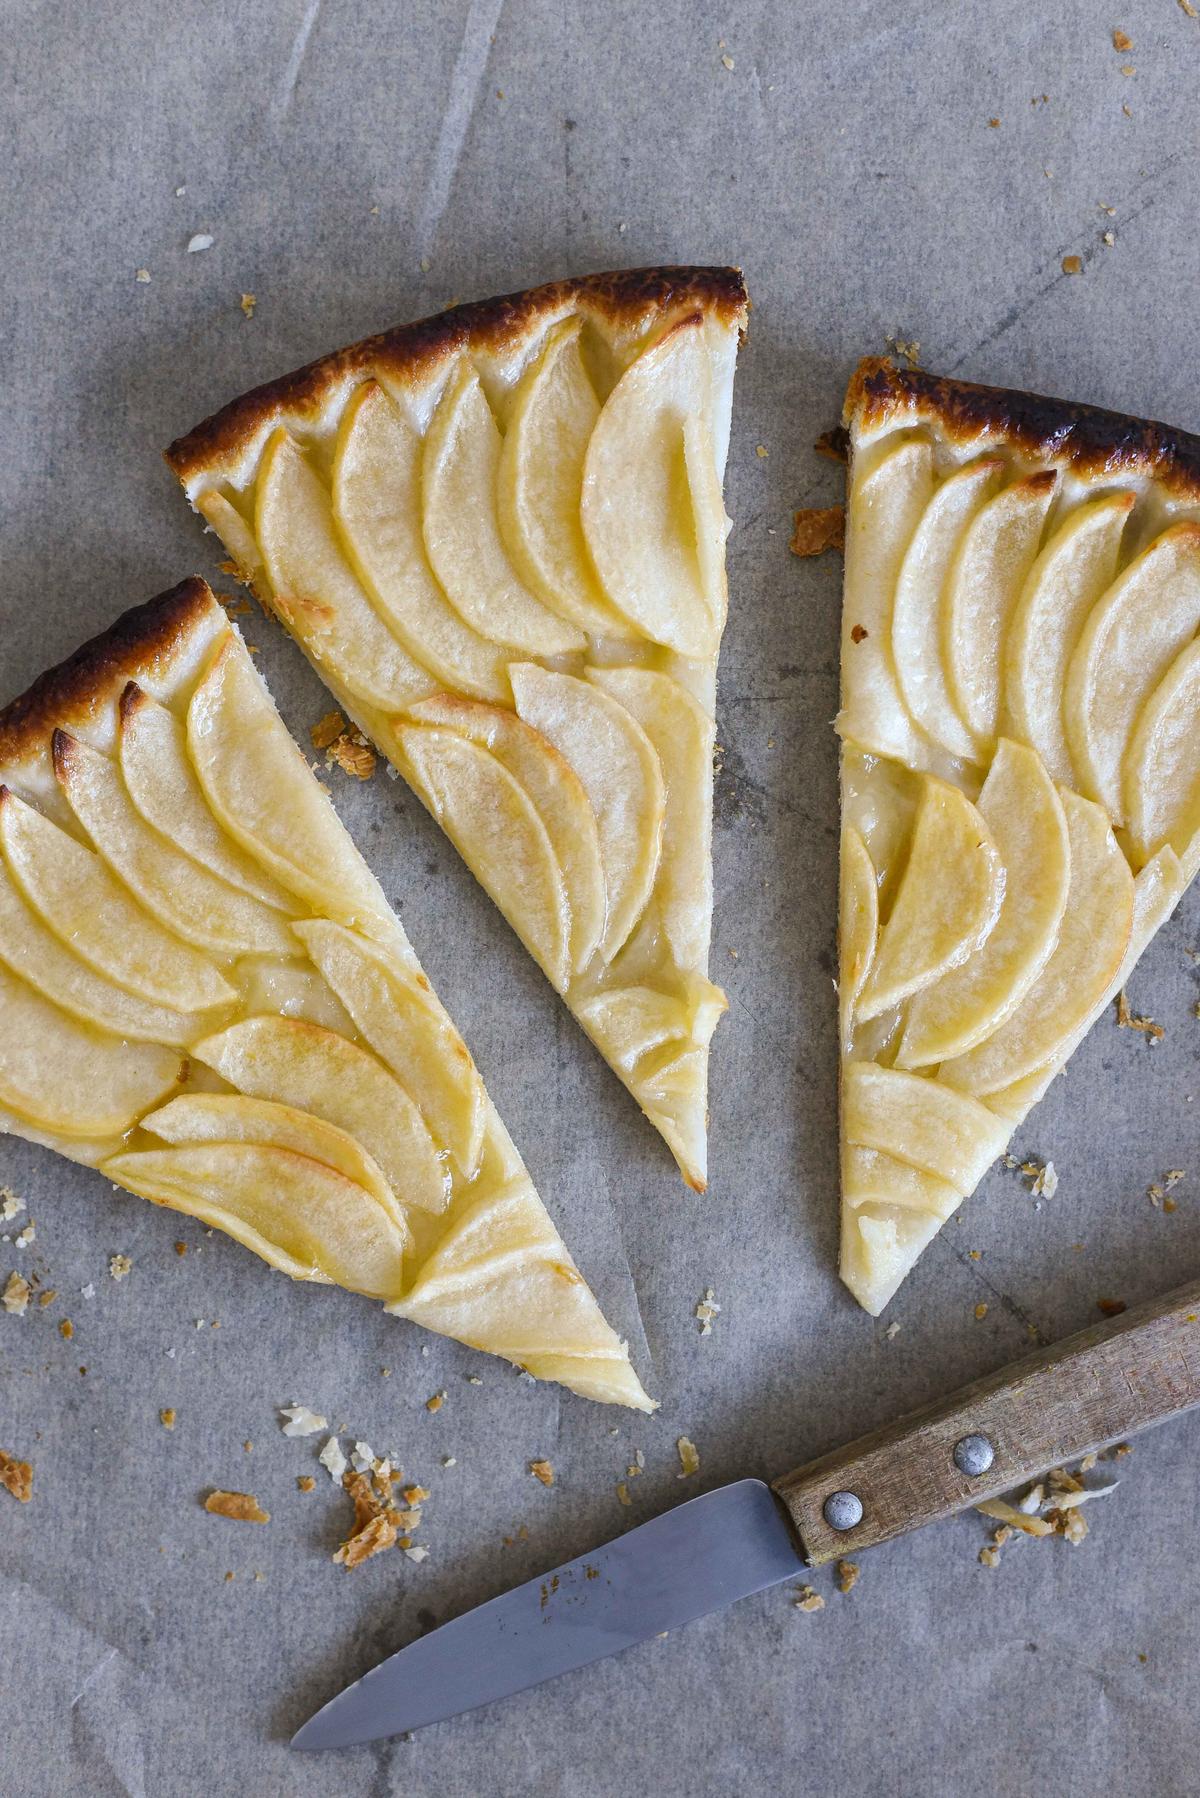 Bake until the crust browns and the apples look slightly caramelized, glaze the top, then slice and serve the same day for the best texture. (Audrey Le Goff)